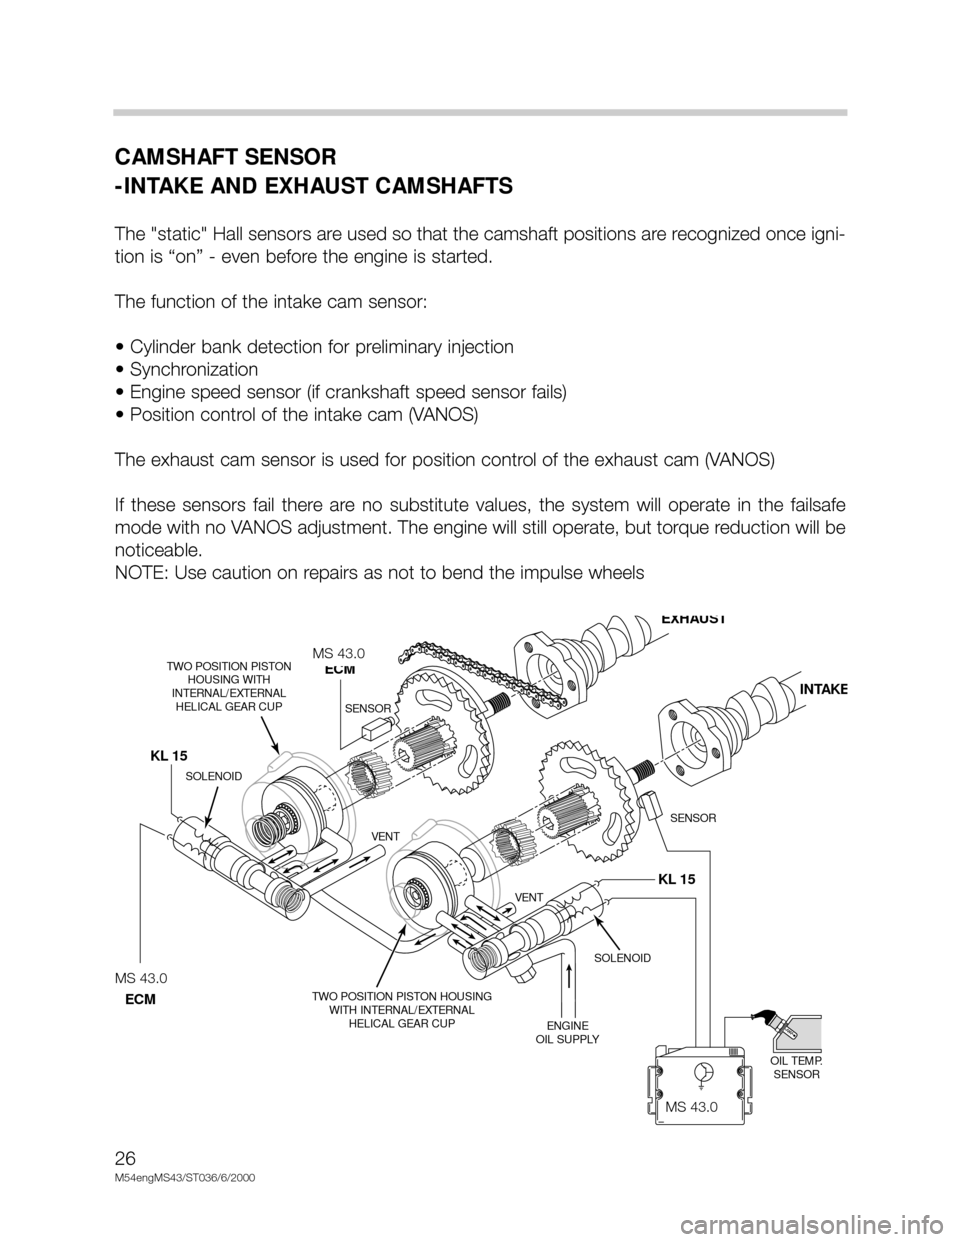 BMW X5 2000 E53 M54 Engine Workshop Manual 26
M54engMS43/ST036/6/2000
CAMSHAFT SENSOR
-INTAKE AND EXHAUST CAMSHAFTS
The "static" Hall sensors are used so that the camshaft positions are recognized once igni-
tion is “on” - even before the 